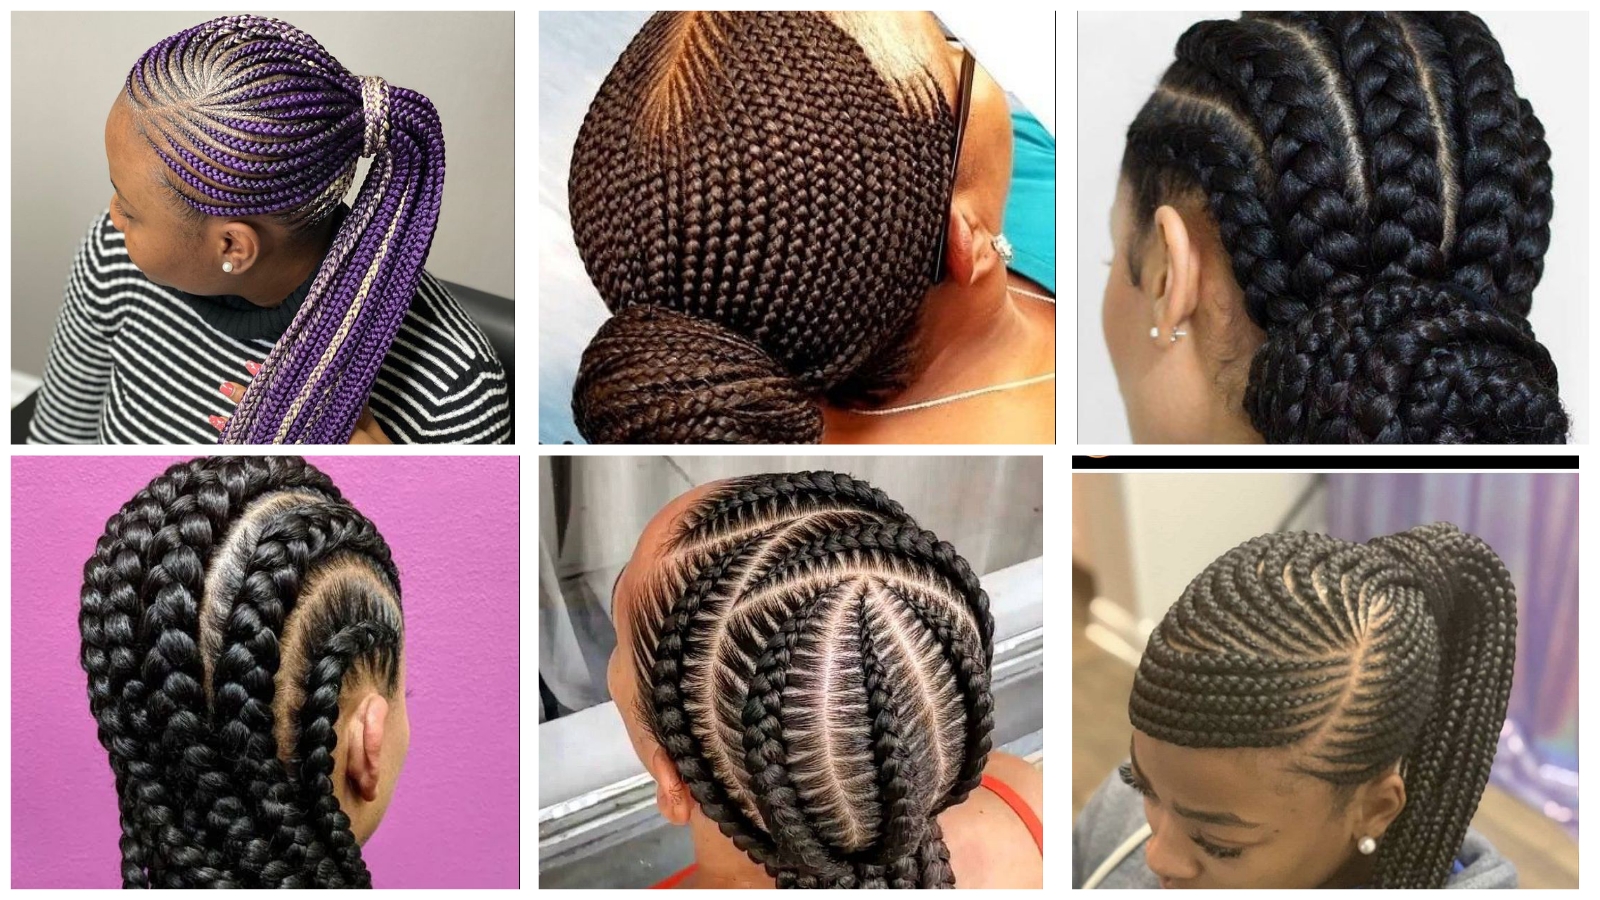 Fascinating Ghana Braids Hairstyles: Embrace African Beauty with Stunning Looks